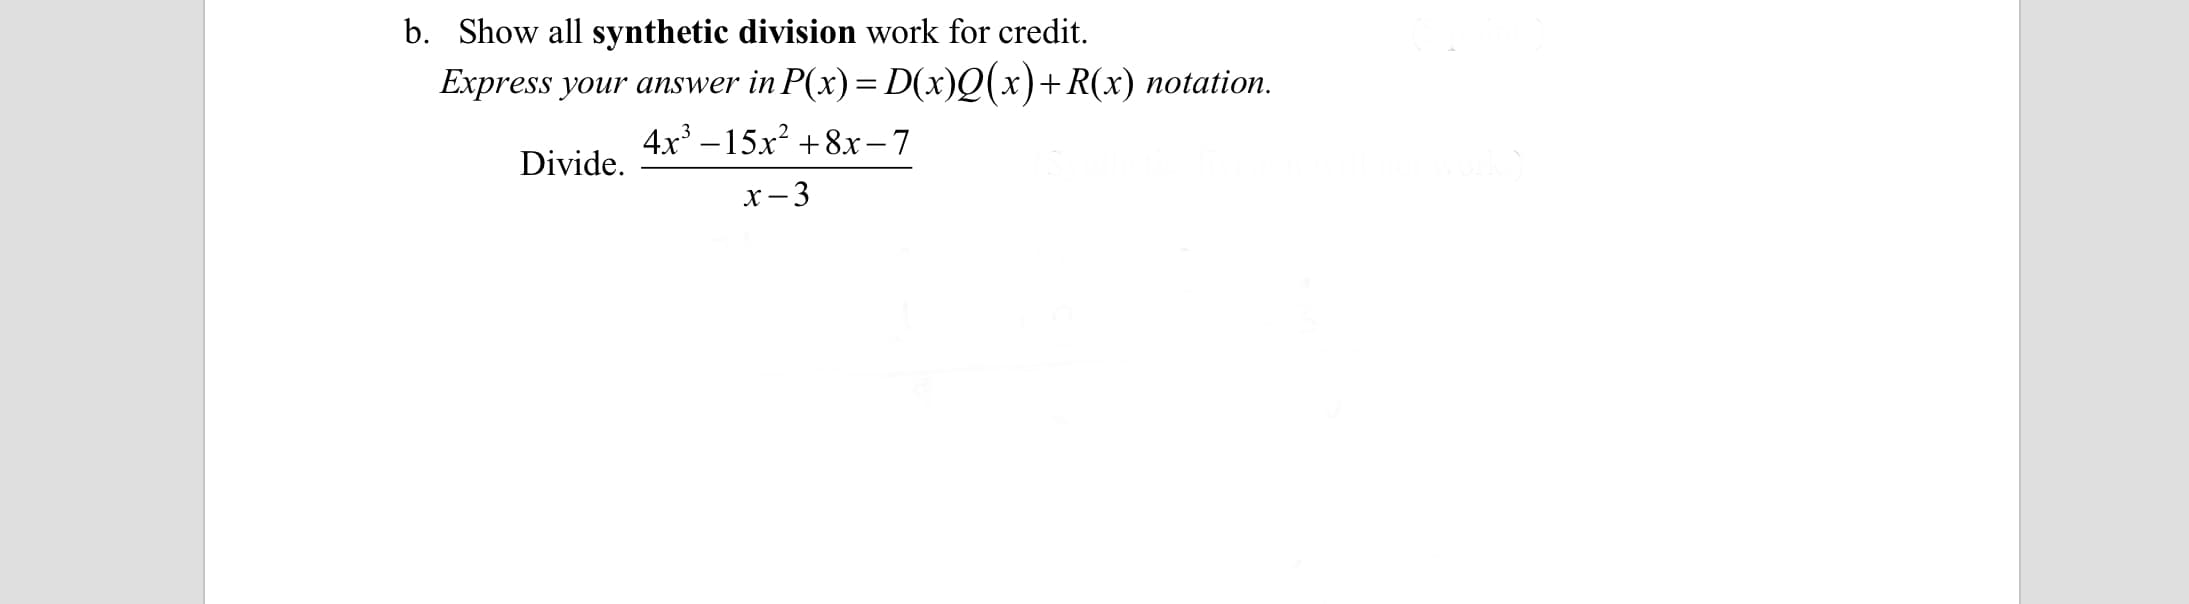 b. Show all synthetic division work for credit.
Express your answer in P(x)=D(x)Q(x)+R(x) notation.
4x –15x? + 8x – 7
Divide.
